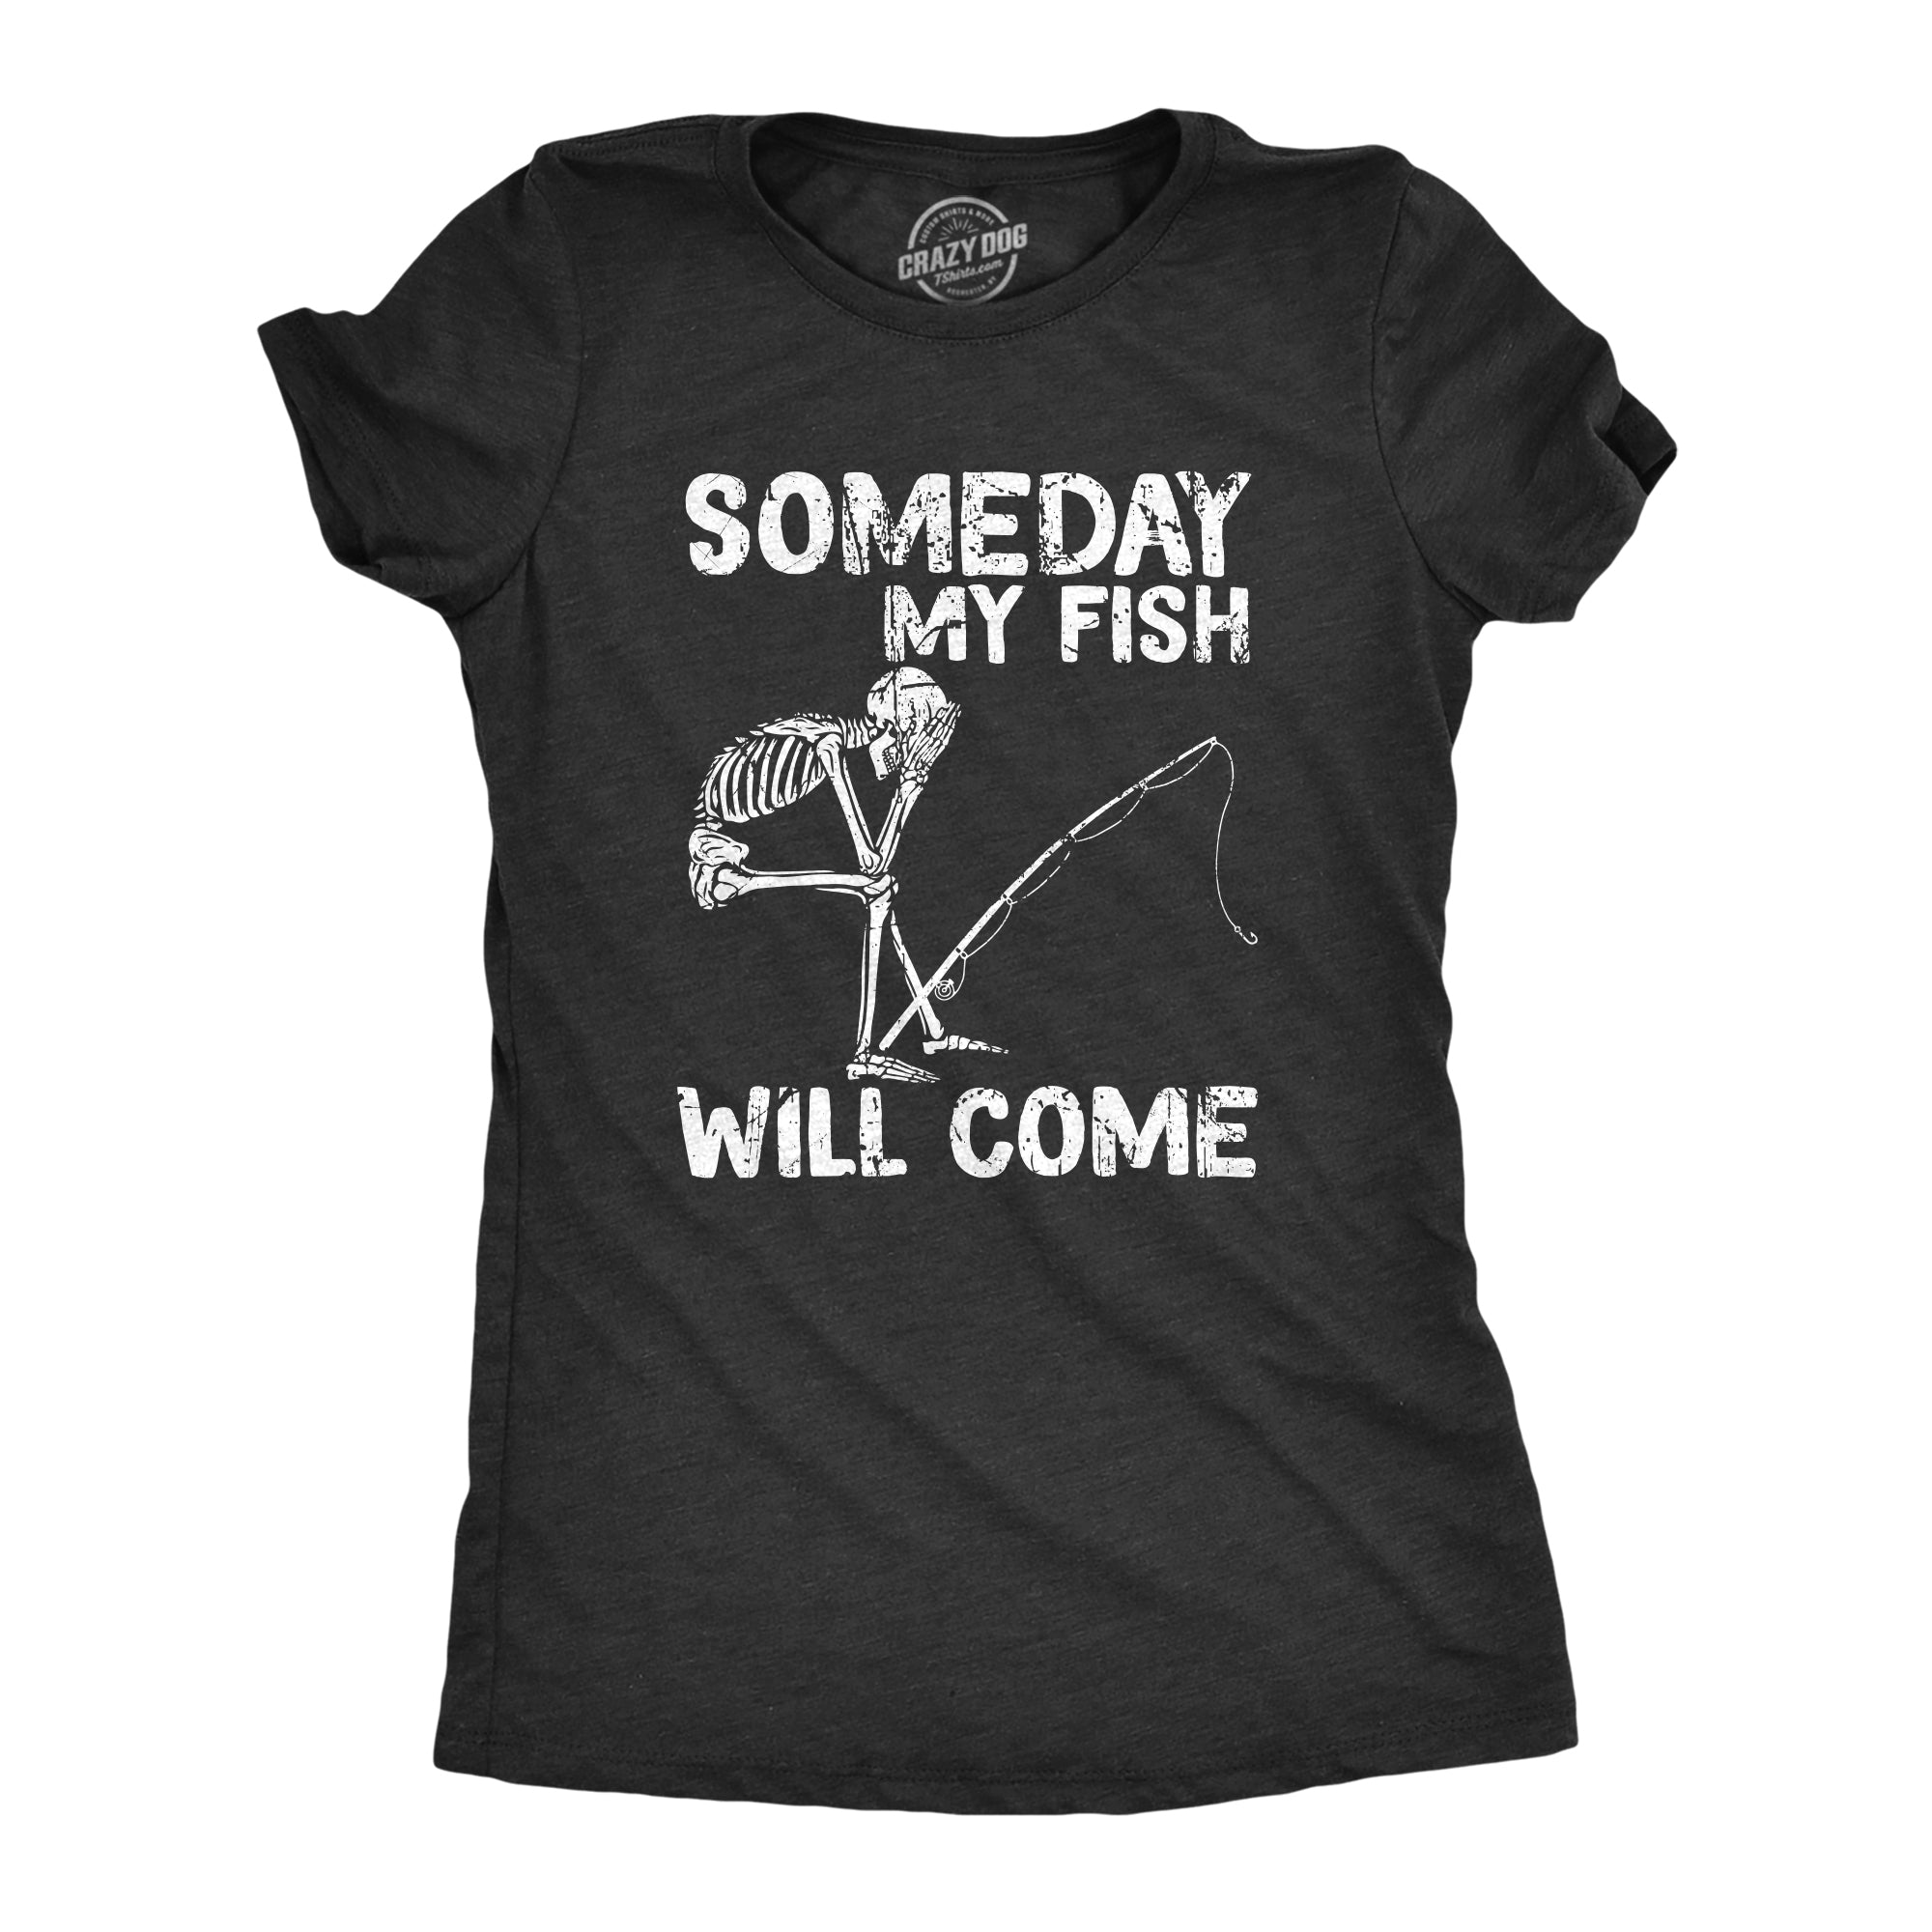 Funny Heather Black - SOMEDAY Someday My Fish Will Come Womens T Shirt Nerdy Fishing Sarcastic Tee